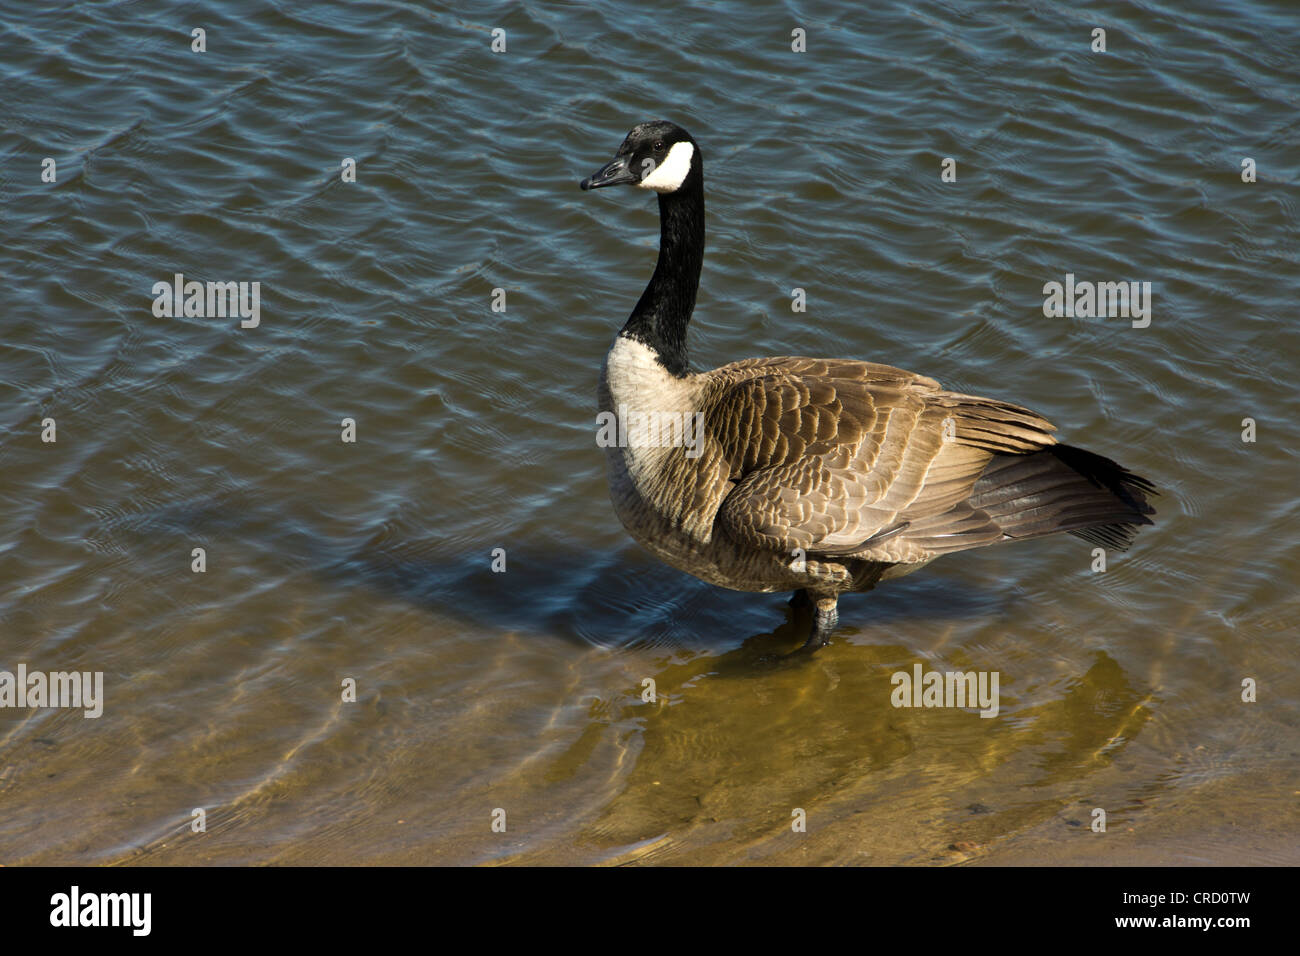 Canadian goose standing in water Stock Photo